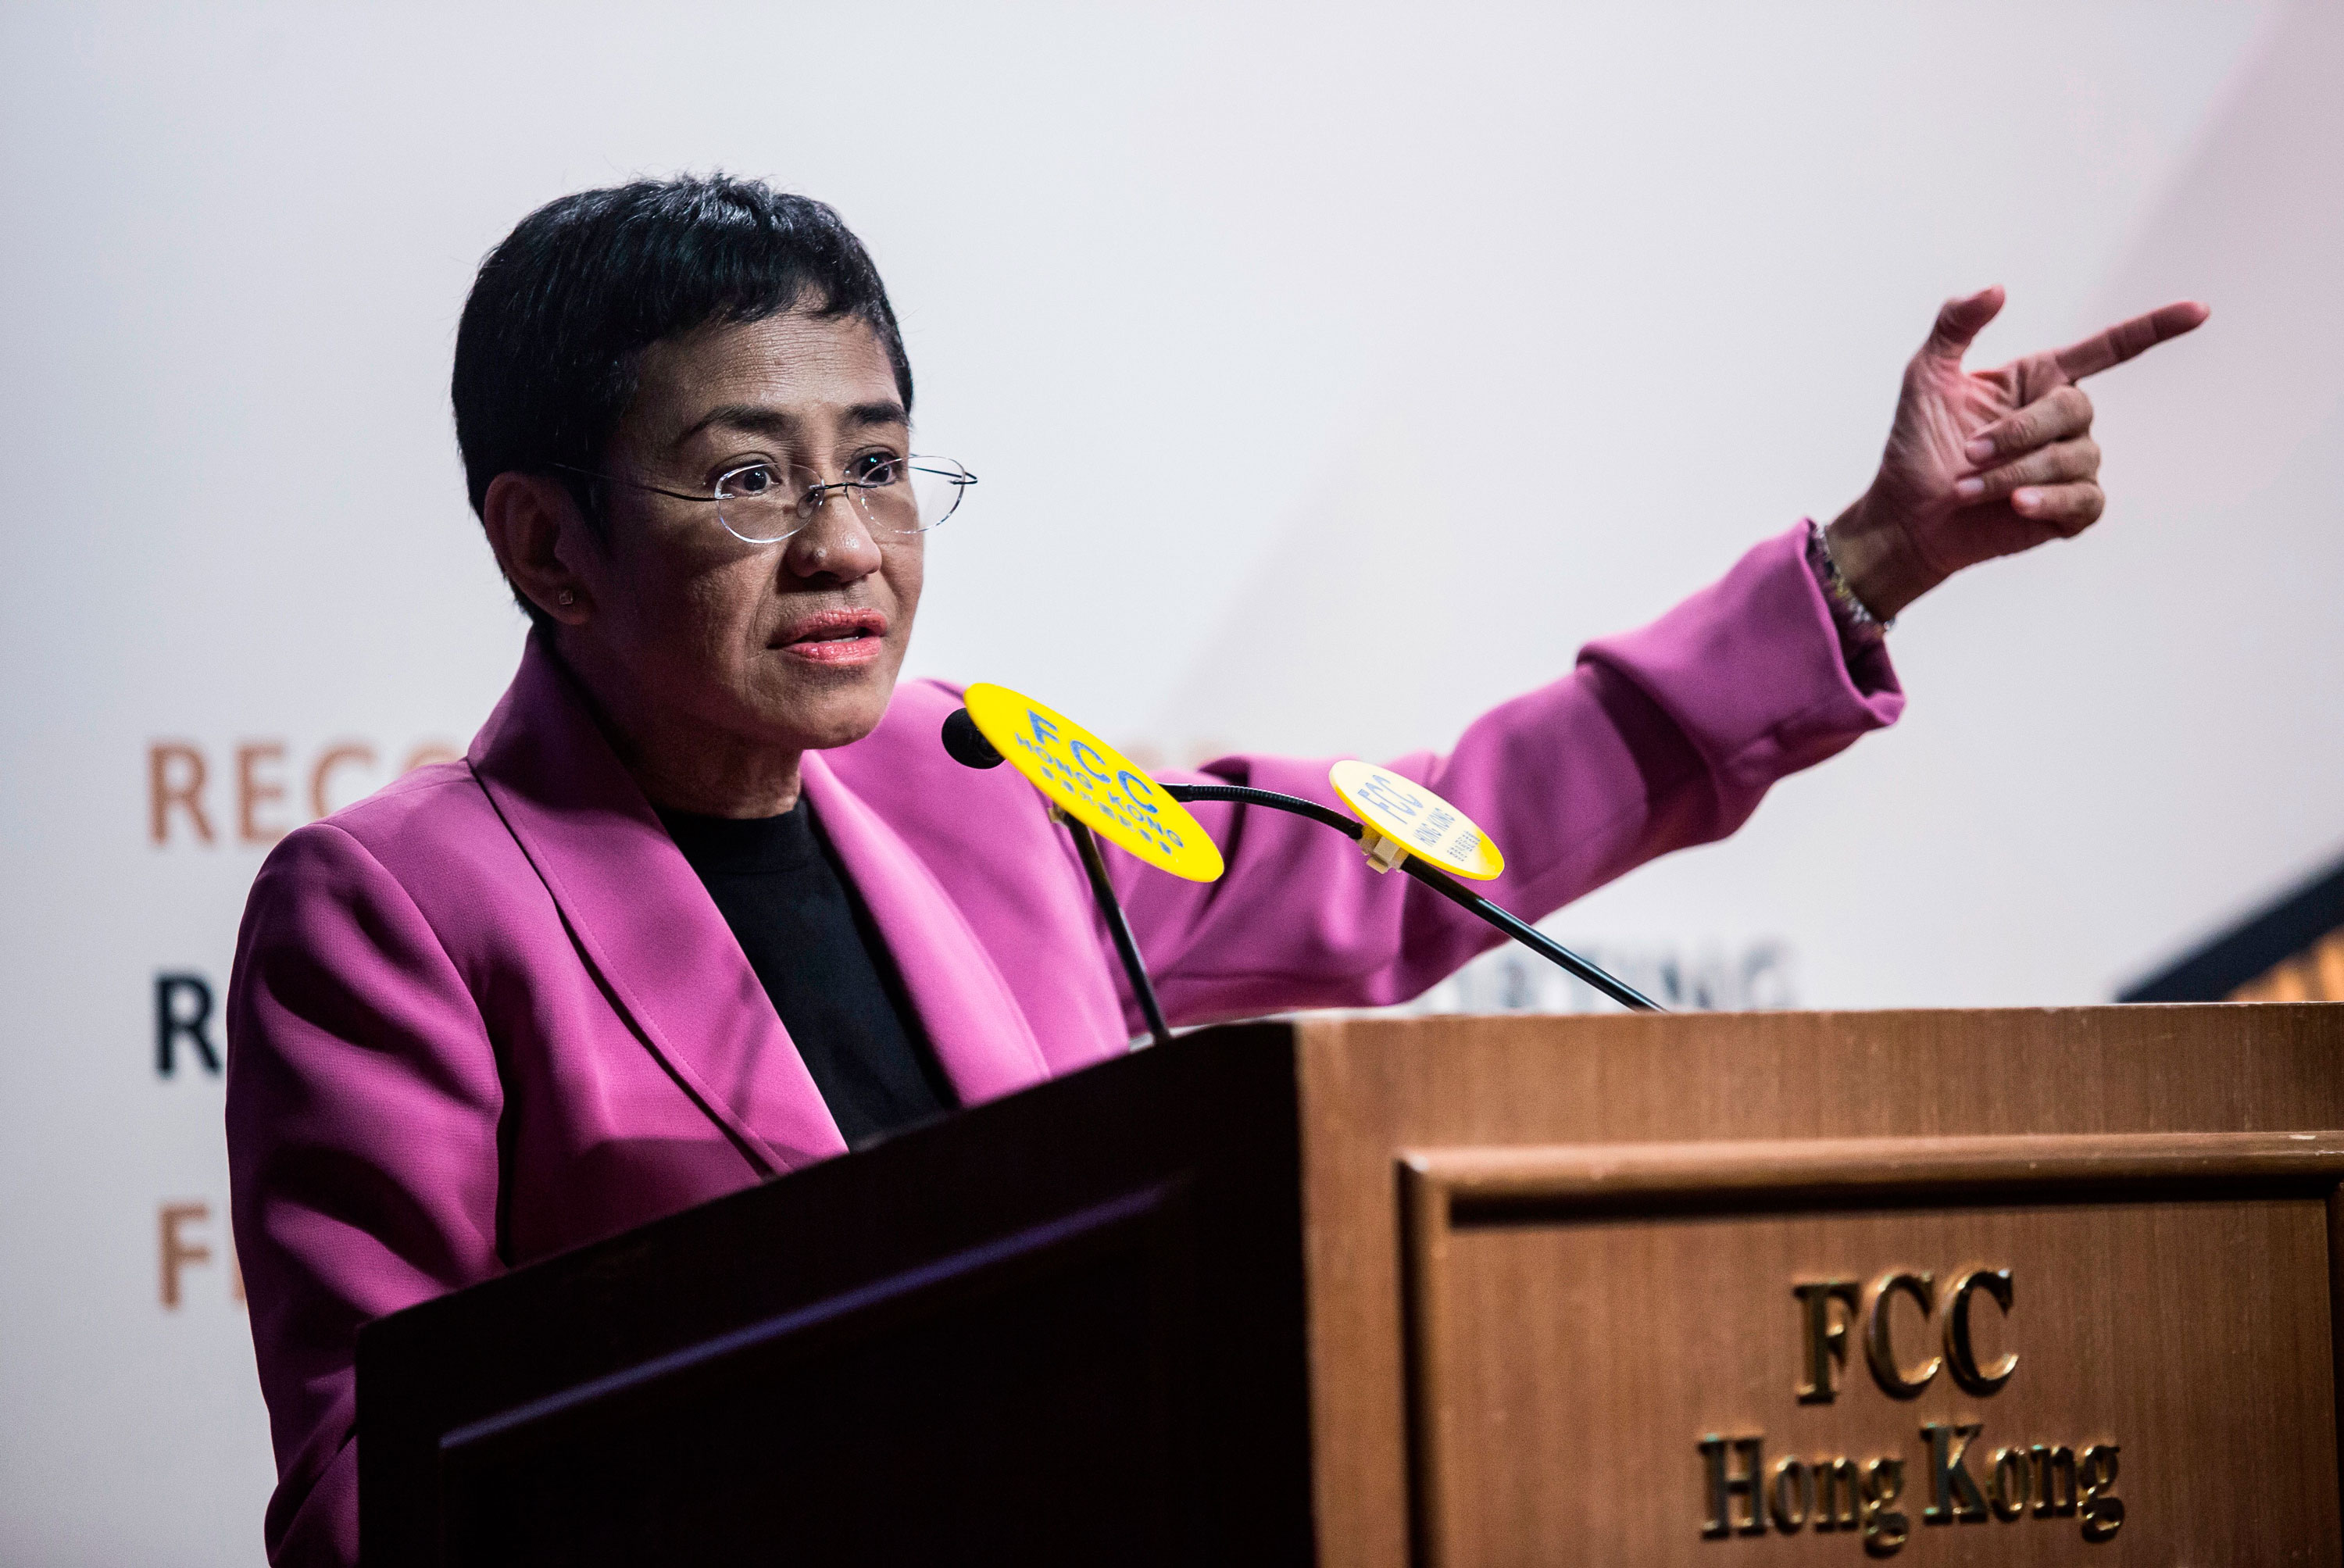 Maria Ressa, co-founder and CEO of the Philippines-based news website Rappler, speaks at the Human Rights Press Awards at the Foreign Correspondents Club of Hong Kong on May 16, 2019.